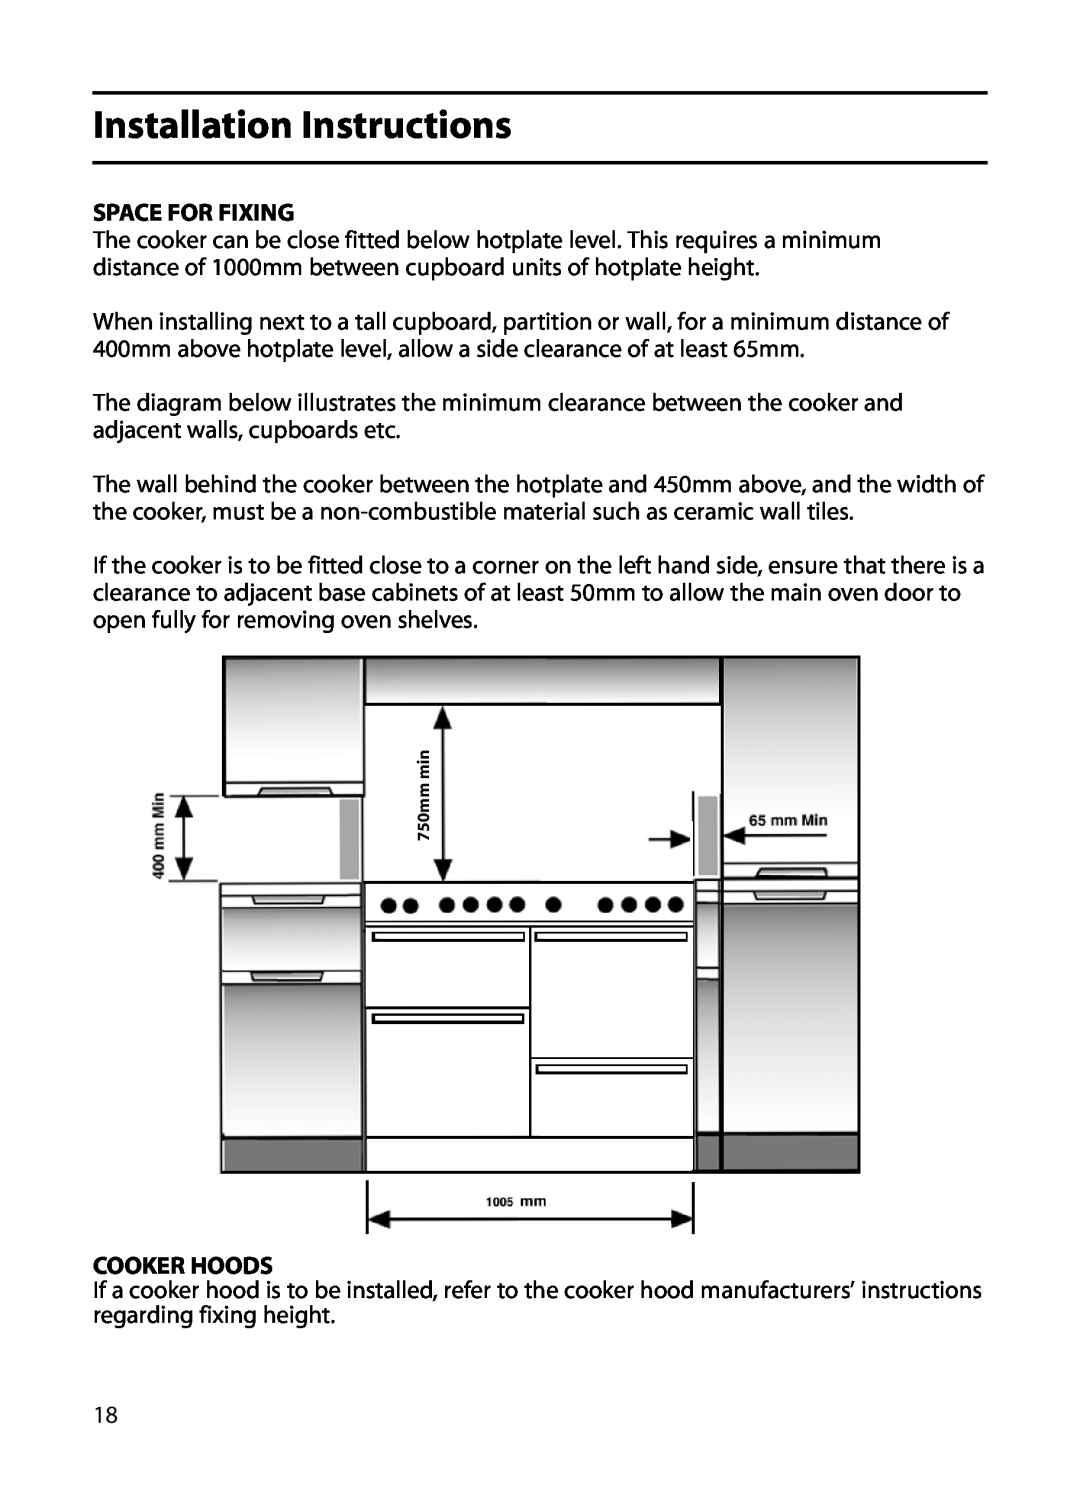 Indesit KP100IX manual Space For Fixing, Cooker Hoods, Installation Instructions, 750mm min 